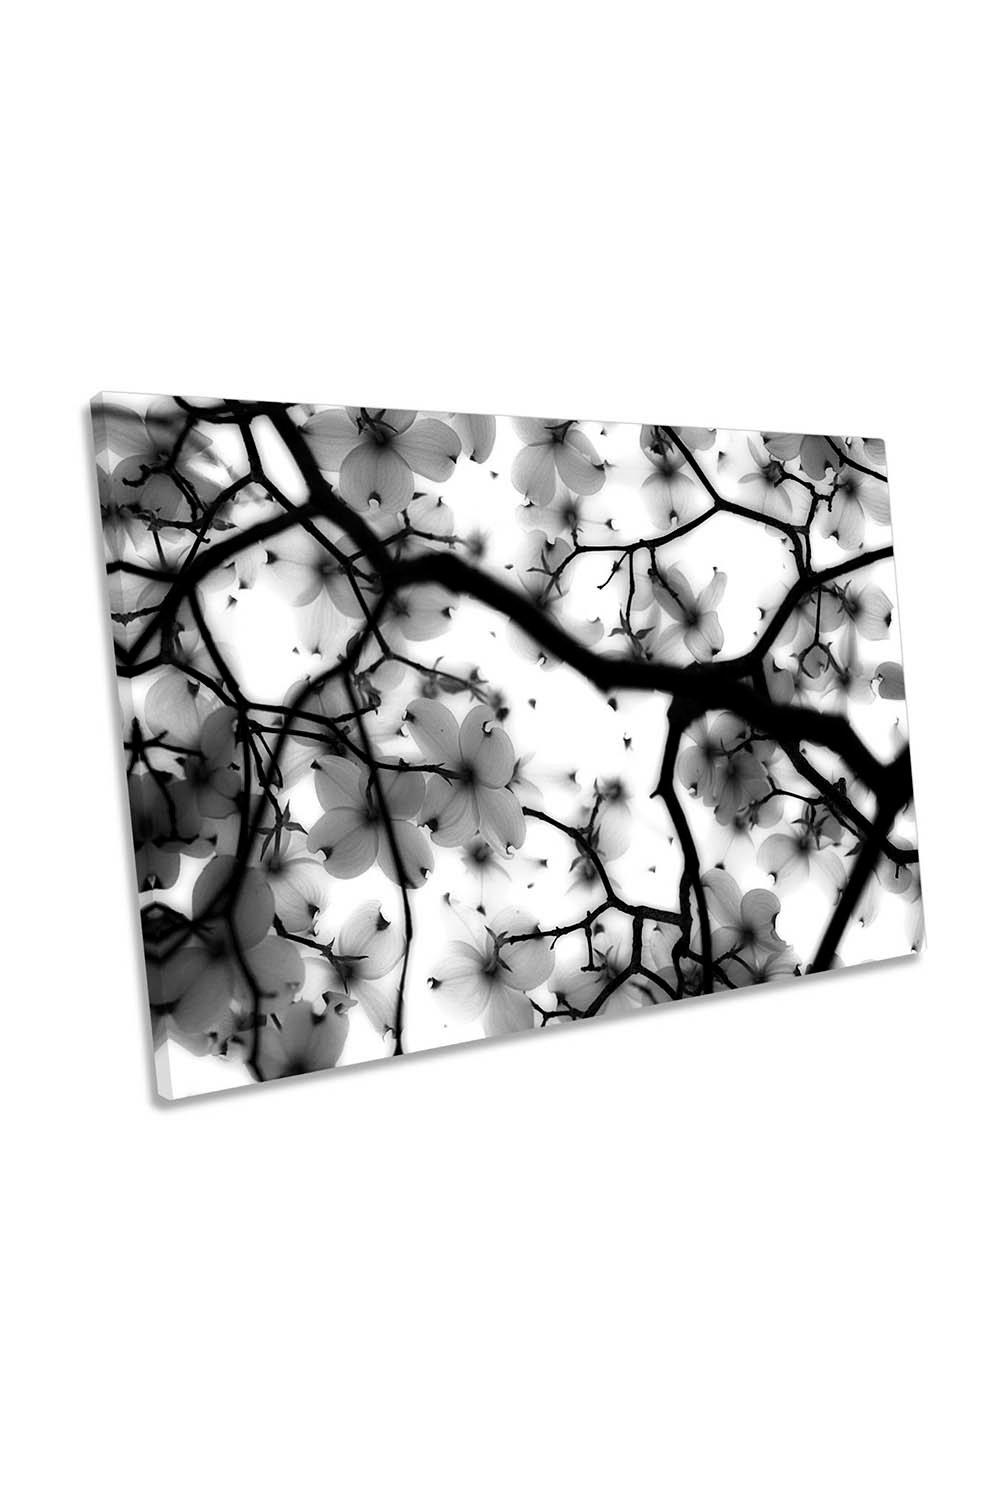 Black and White Floral Flowers Canvas Wall Art Picture Print